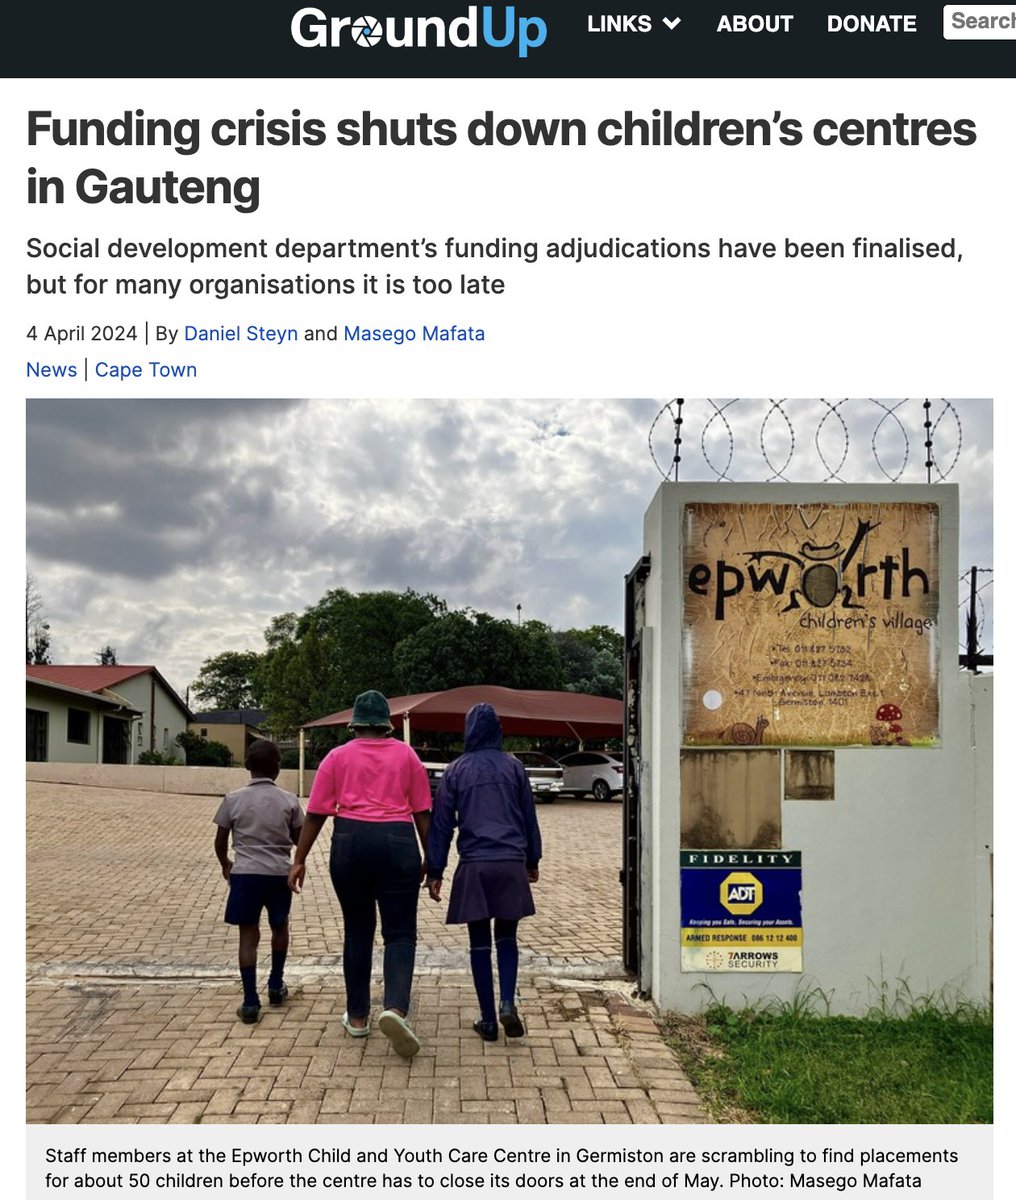 'The Gauteng Department of Social Development’s funding decisions for the new financial year were delayed, leaving many organisations uncertain about their future.' Read more here: groundup.org.za/article/care-o…